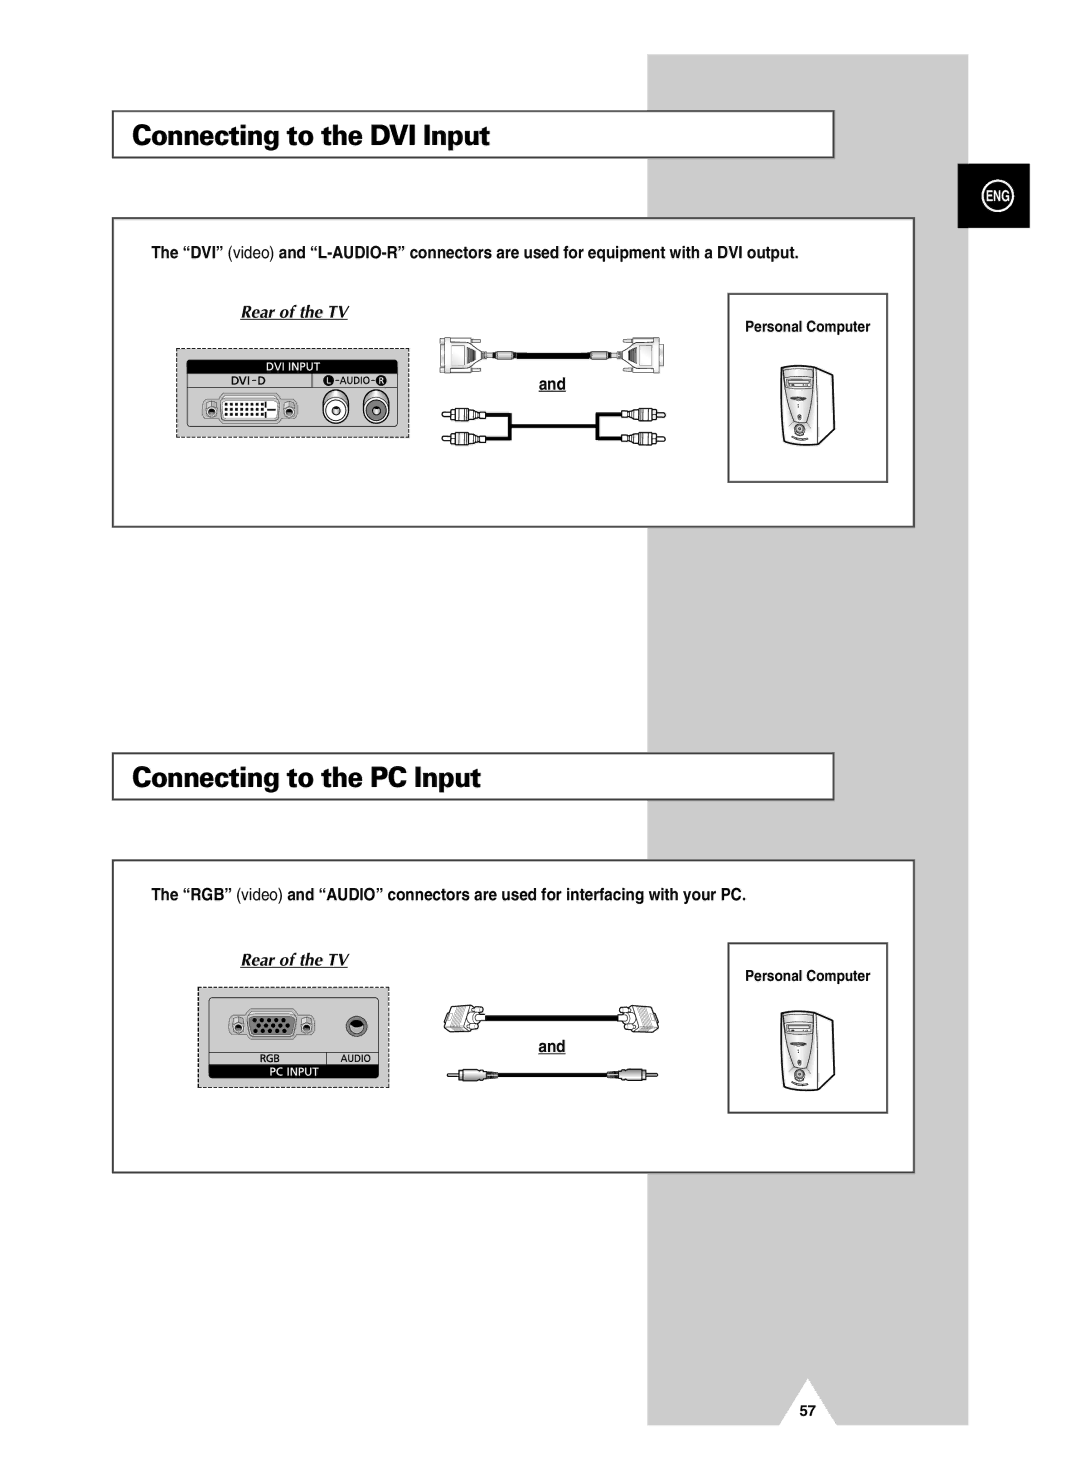 Samsung PS-37S4A manual Connecting to the DVI Input, Connecting to the PC Input 